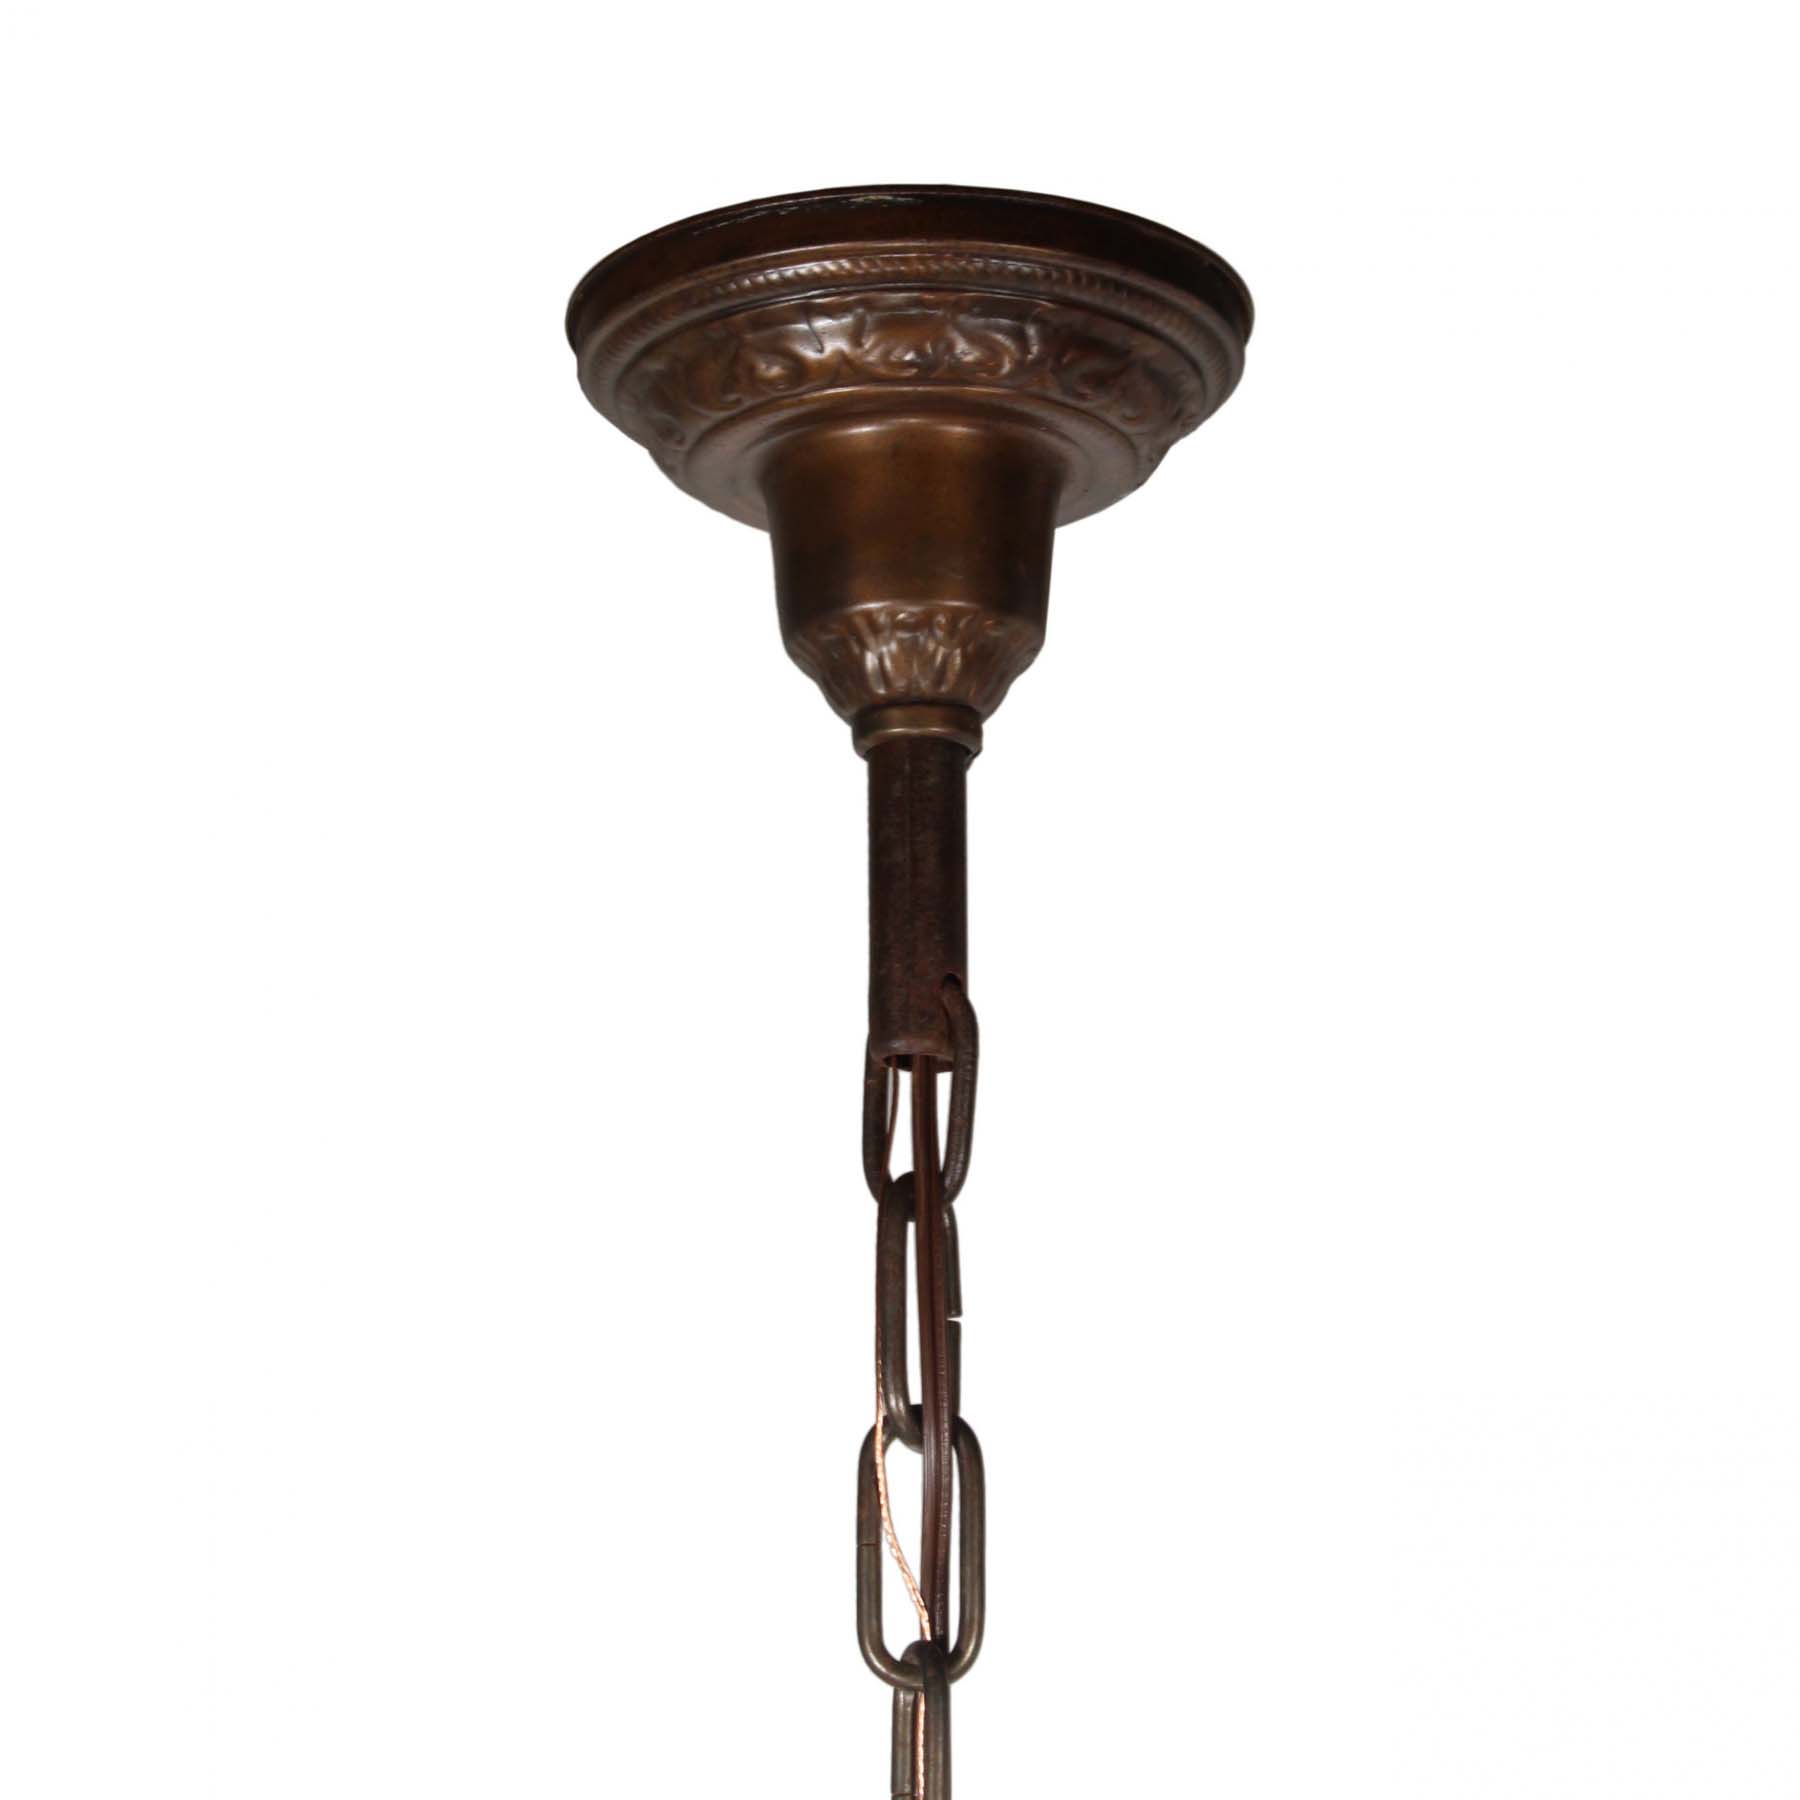 SOLD Antique Cast Iron Chandelier with Glass Shade-69940